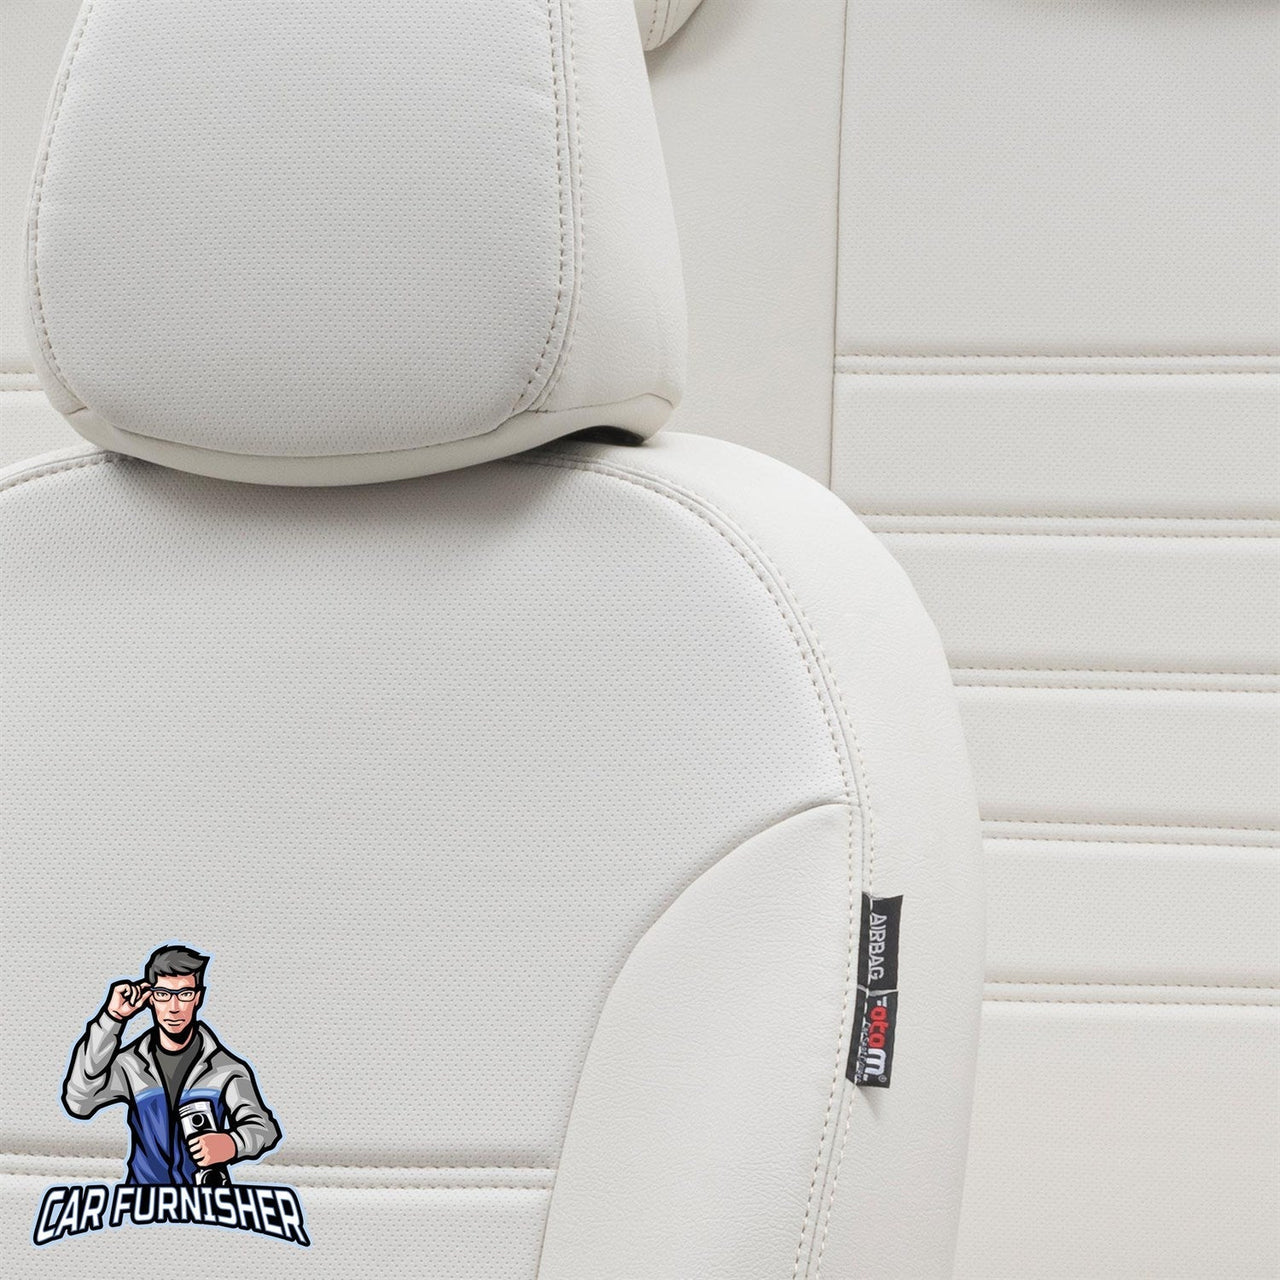 Opel Vectra Seat Covers Istanbul Leather Design Ivory Leather